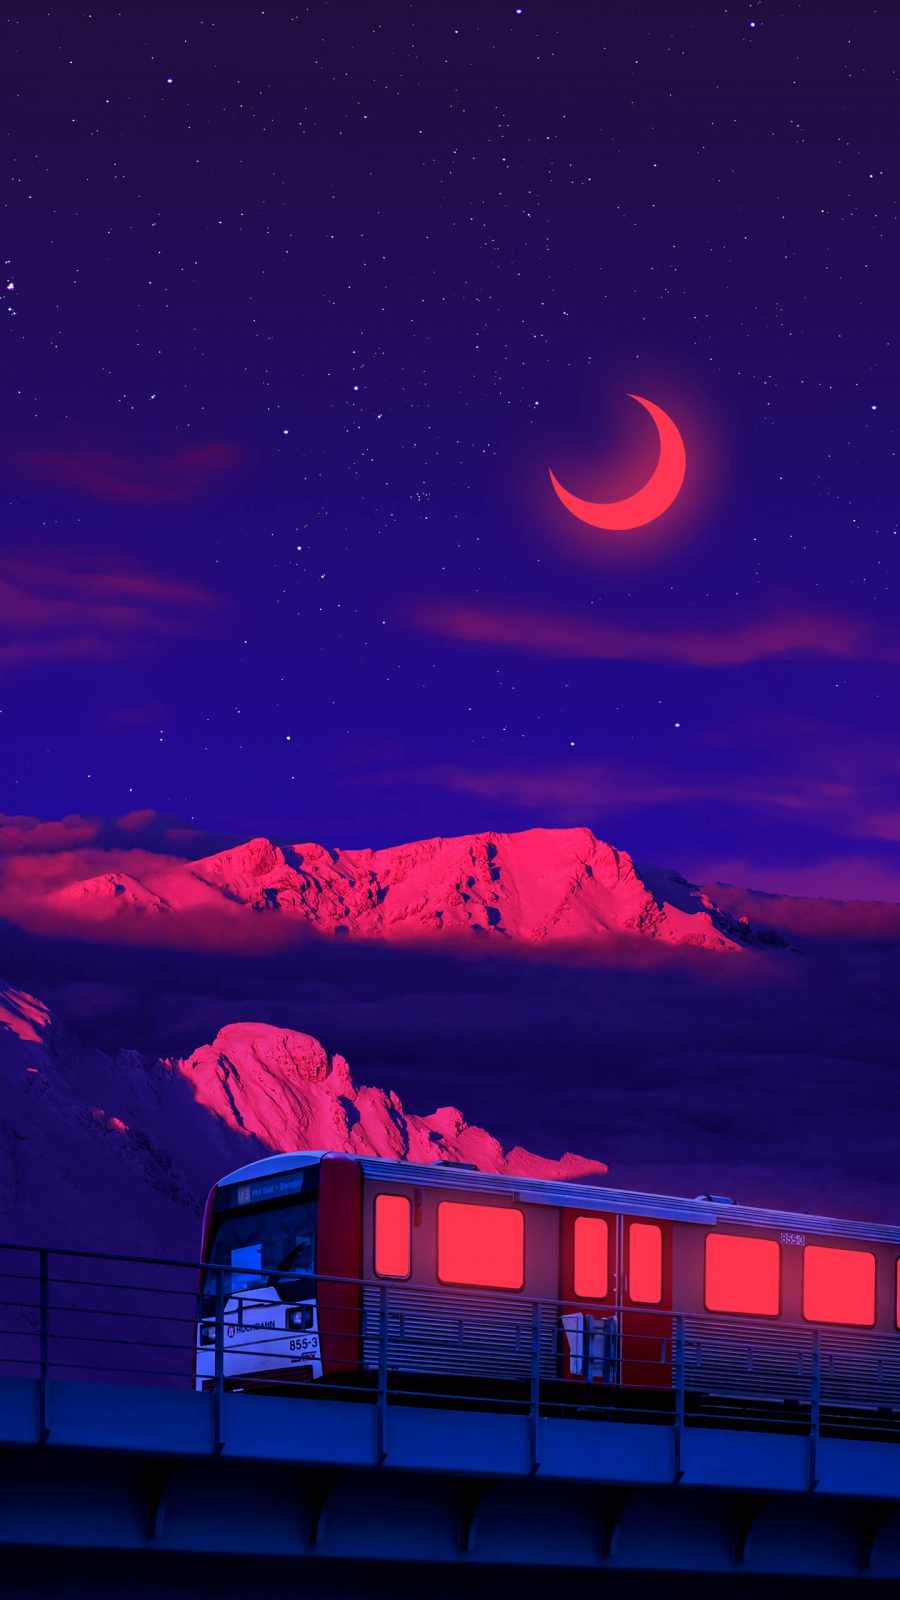 Midnight Train IPhone Wallpaper 1 - IPhone Wallpapers : iPhone Wallpapers